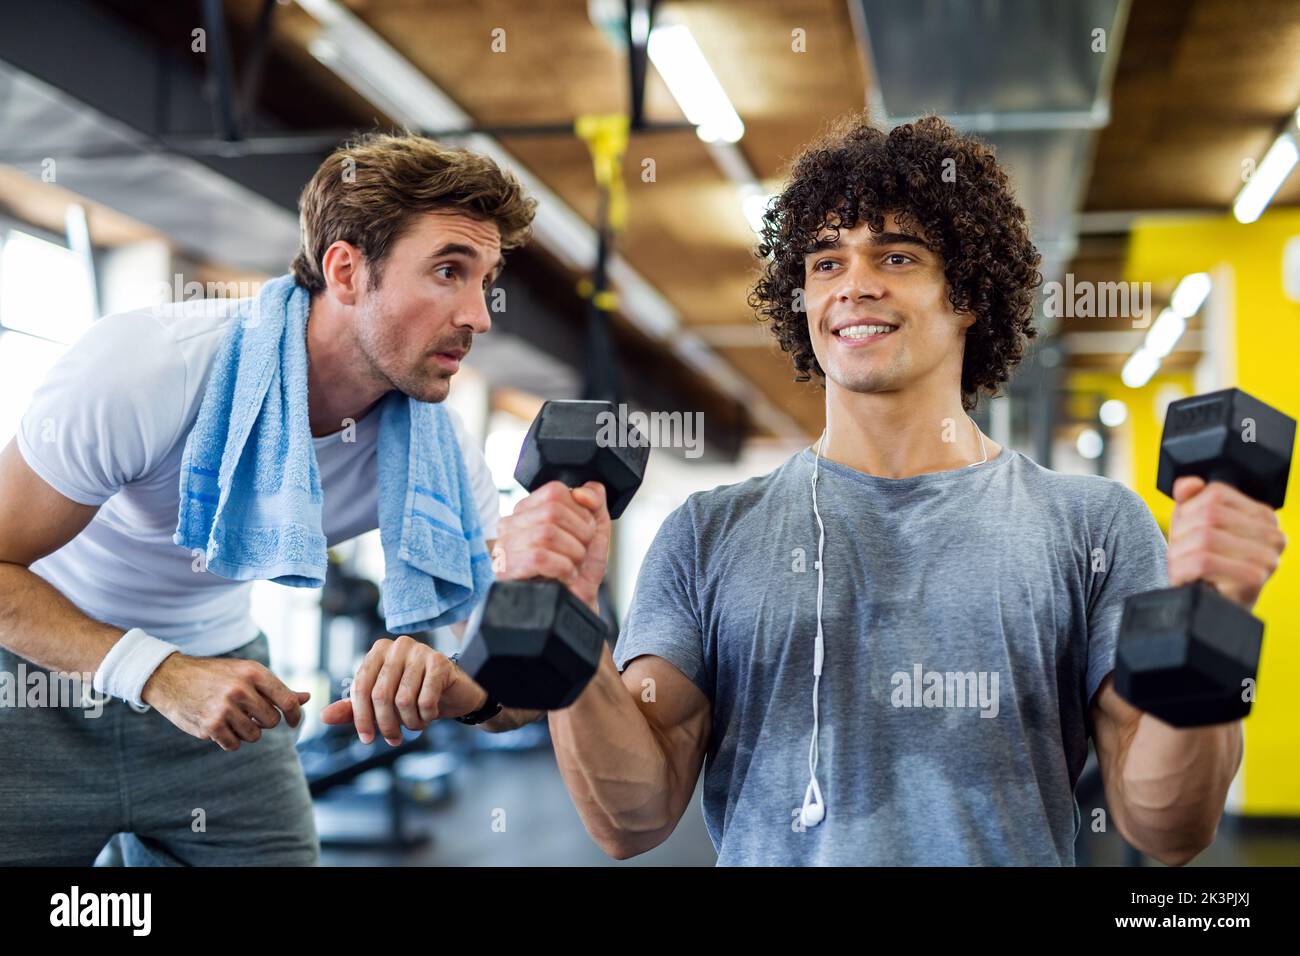 Fitness, sport, exercising concept. Fit man exercising together with his personal trainer in gym. Stock Photo